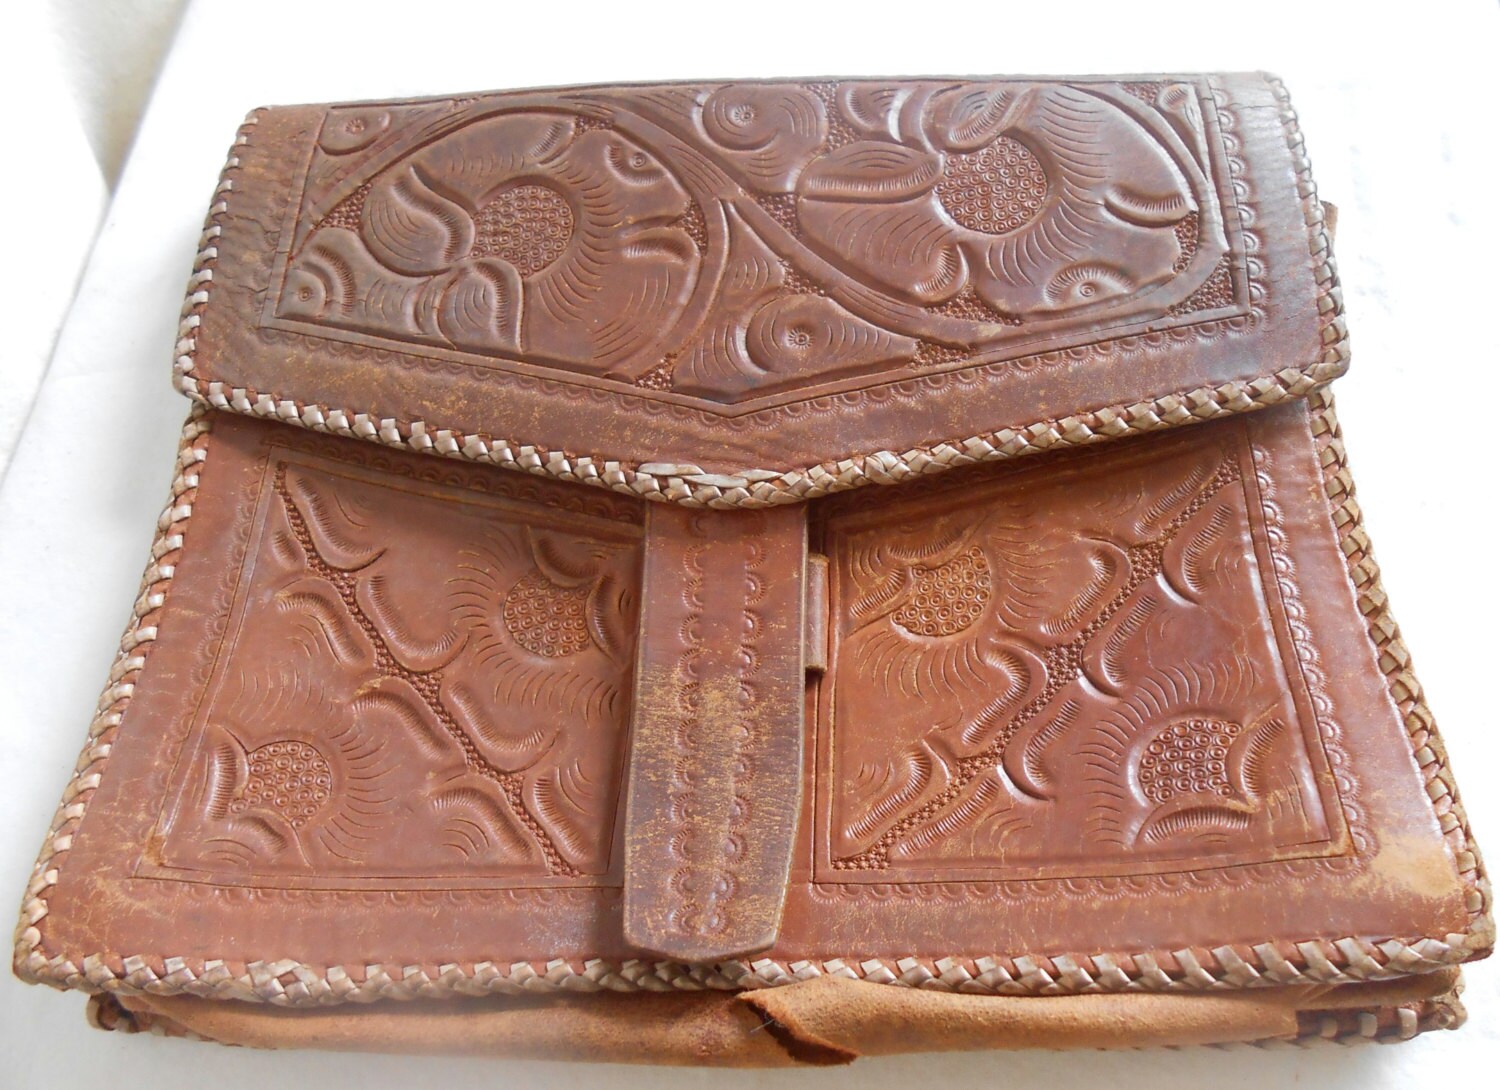 Vintage Hand Tooled Leather Purse Clutch Made in Guatalama - Etsy